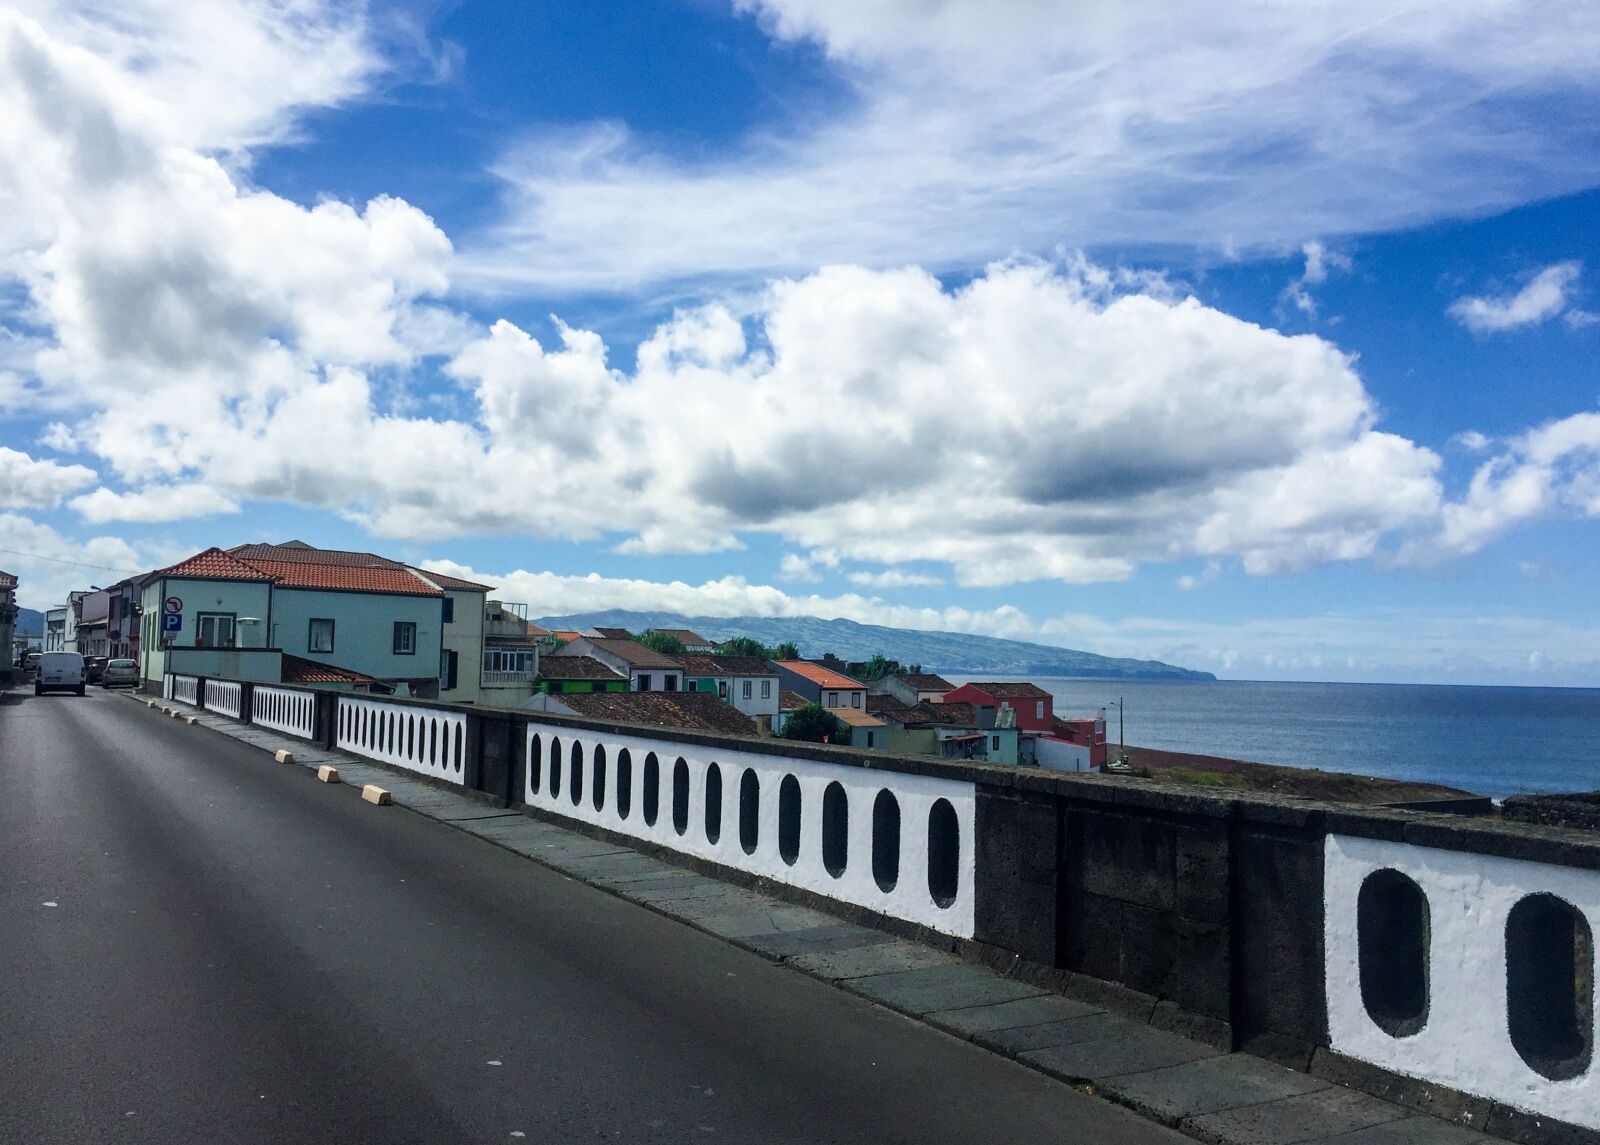 Apple iPhone 6 sample photo. Sao miguel, azores islands photography